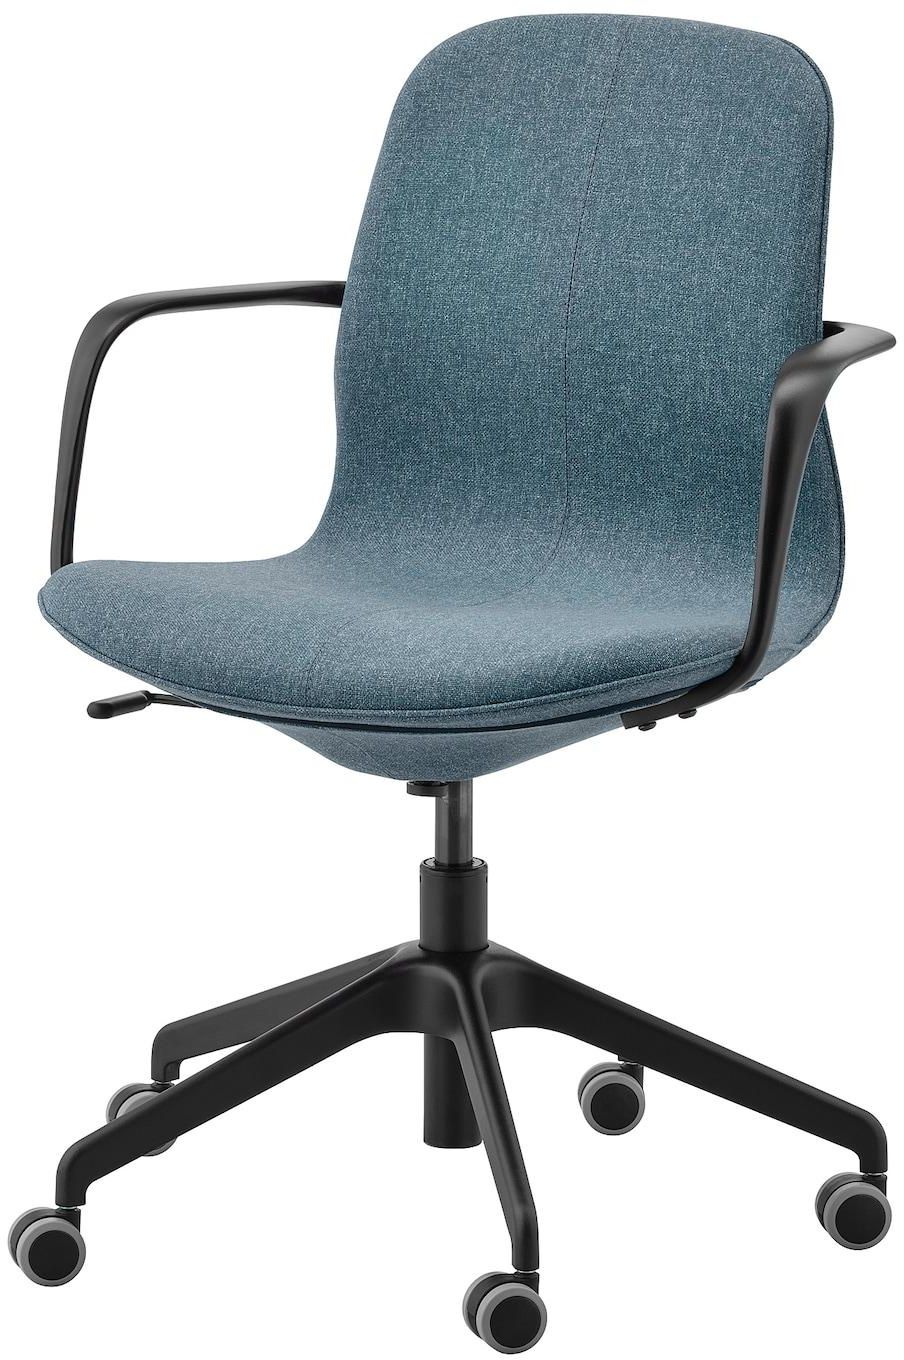 LÅNGFJÄLL Conference chair with armrests - Gunnared blue/black